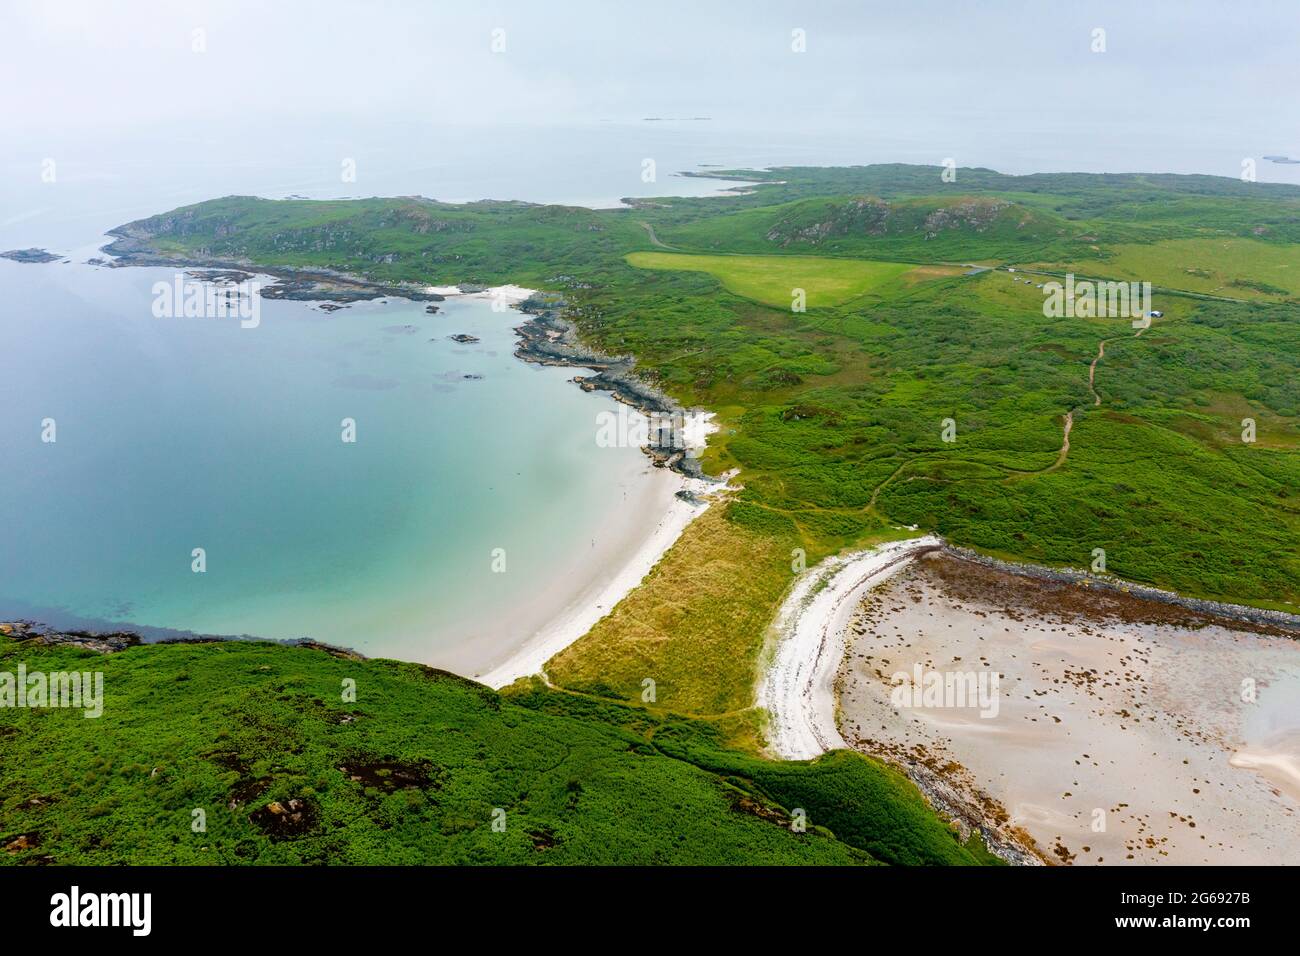 The Twin Beaches tombolo or sandy isthmus at An Doirlinn next to Eilean Garbh island at north end of  Isle of Gigha, Kintyre peninsula, Argyll & Bute, Stock Photo